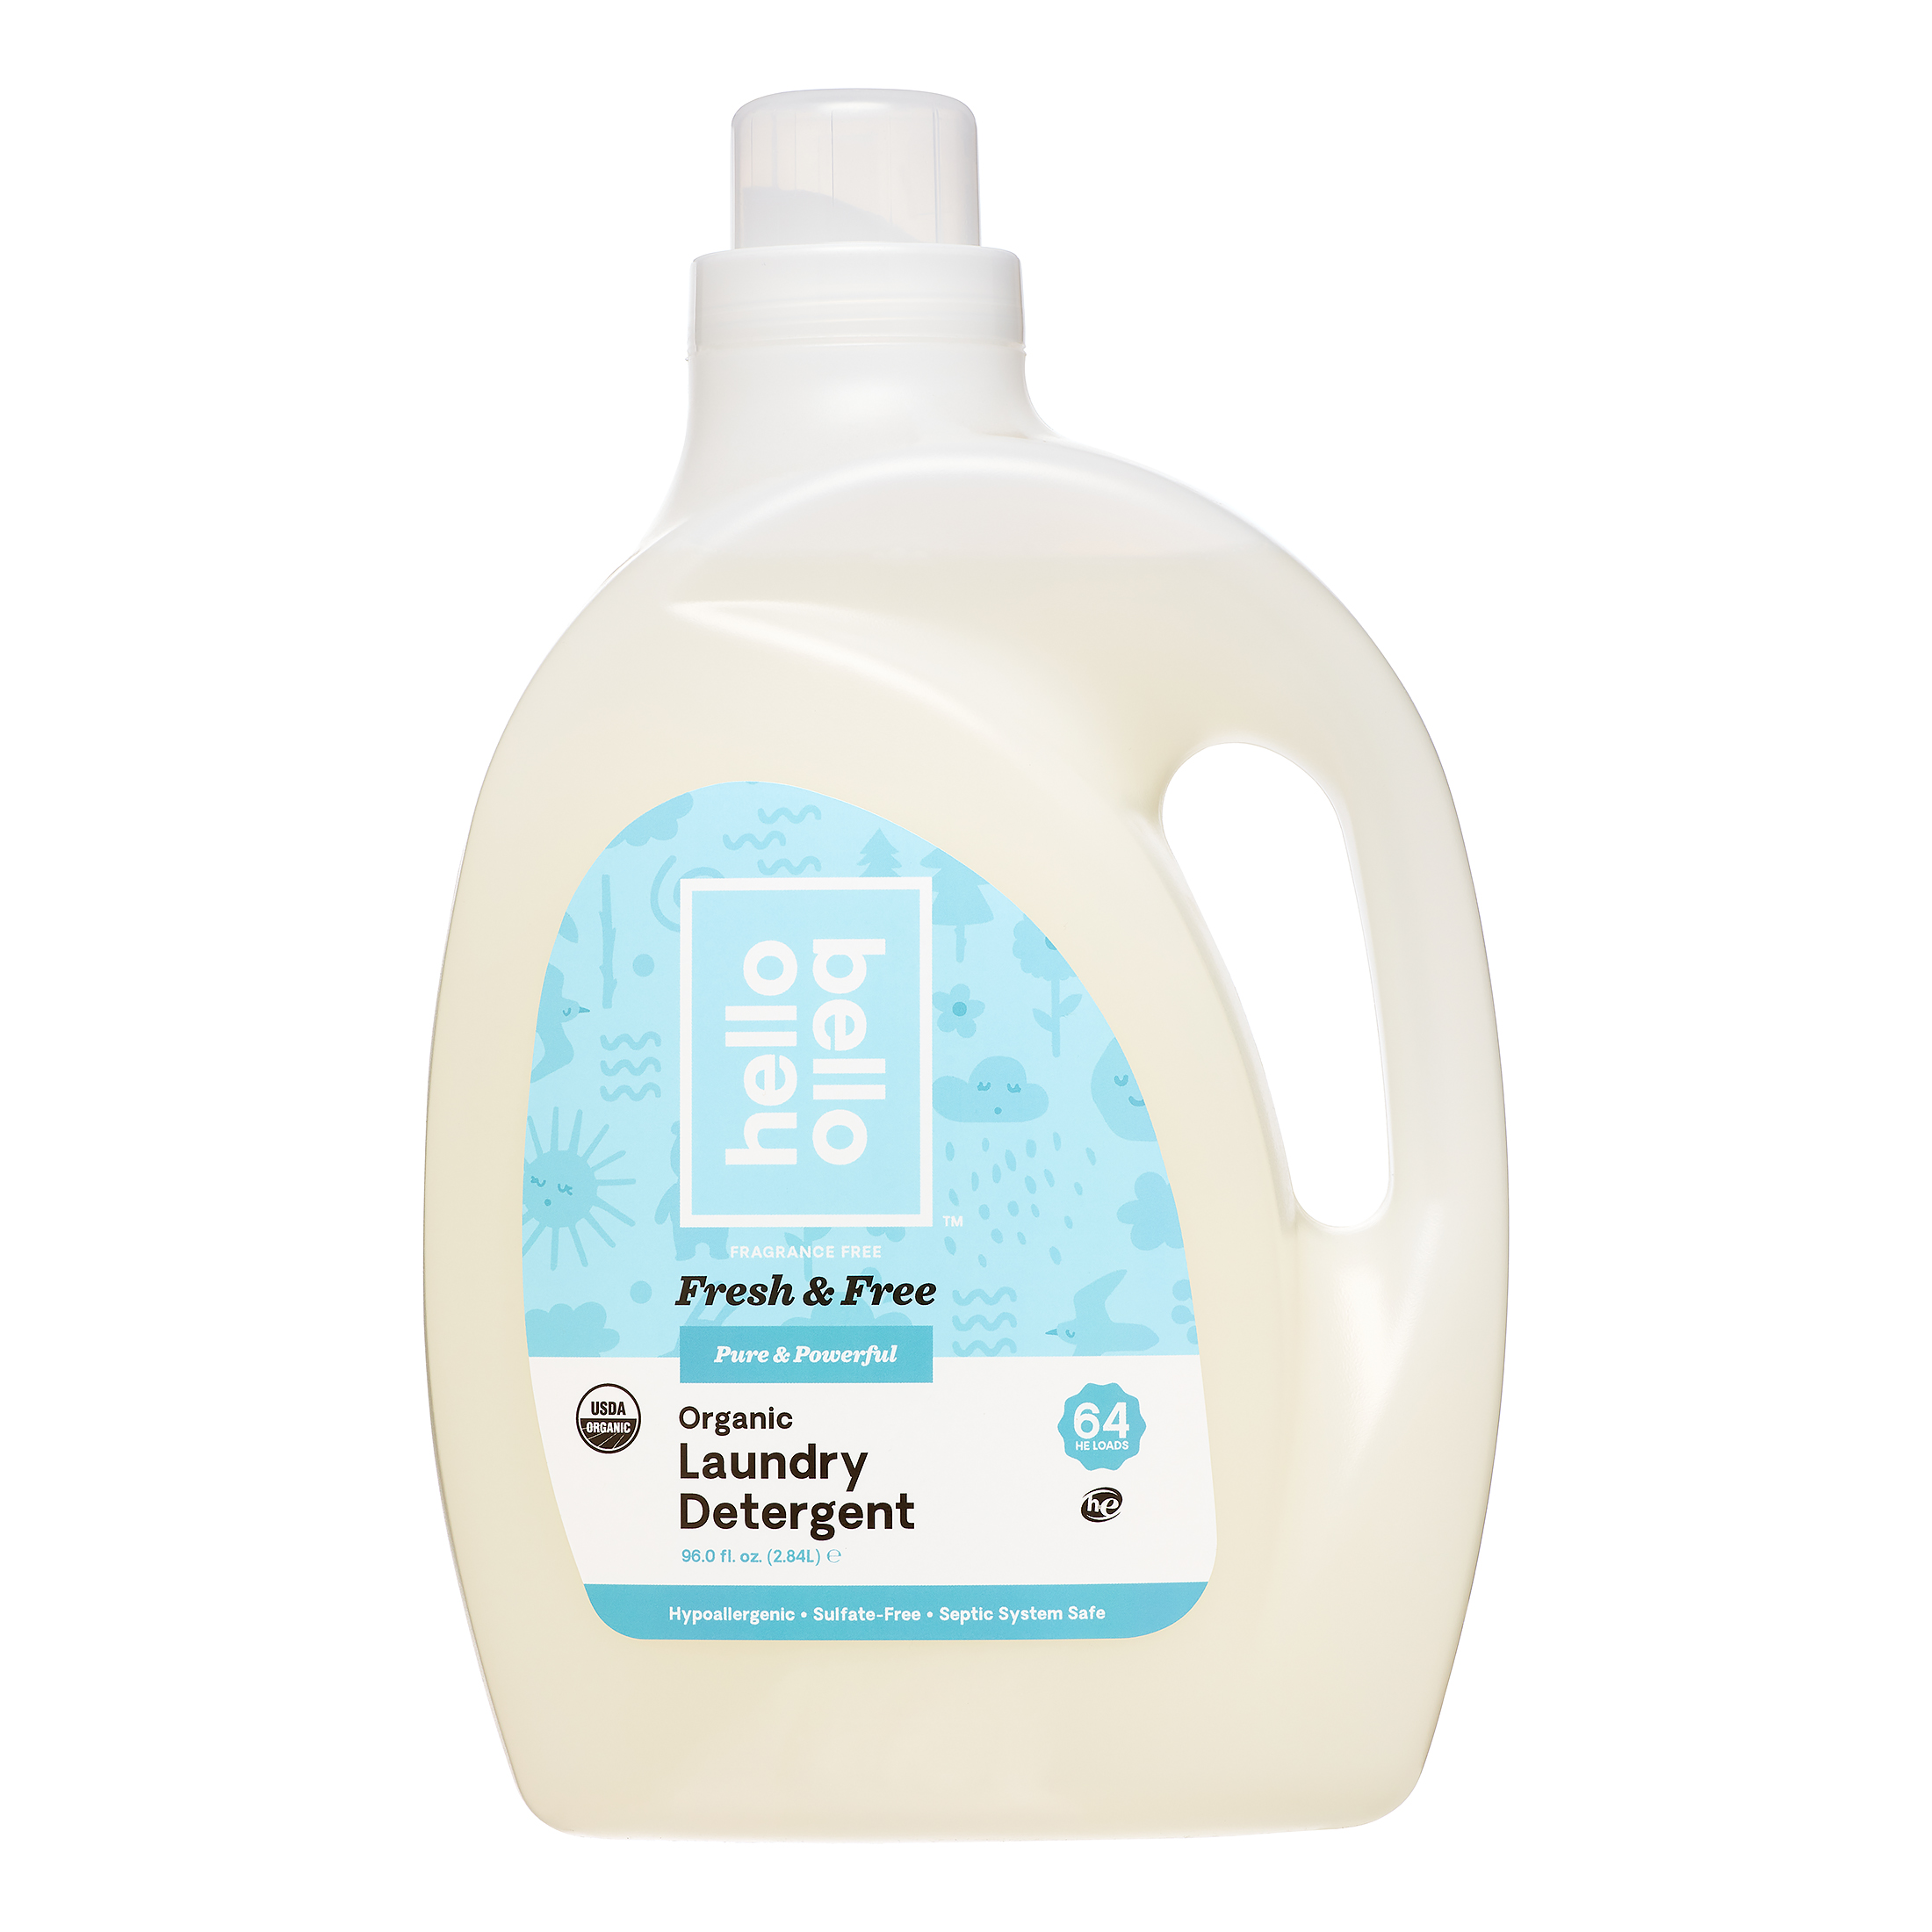 Hello Bello Organic Laundry Detergent, Unscented, 96 fl oz - image 2 of 5